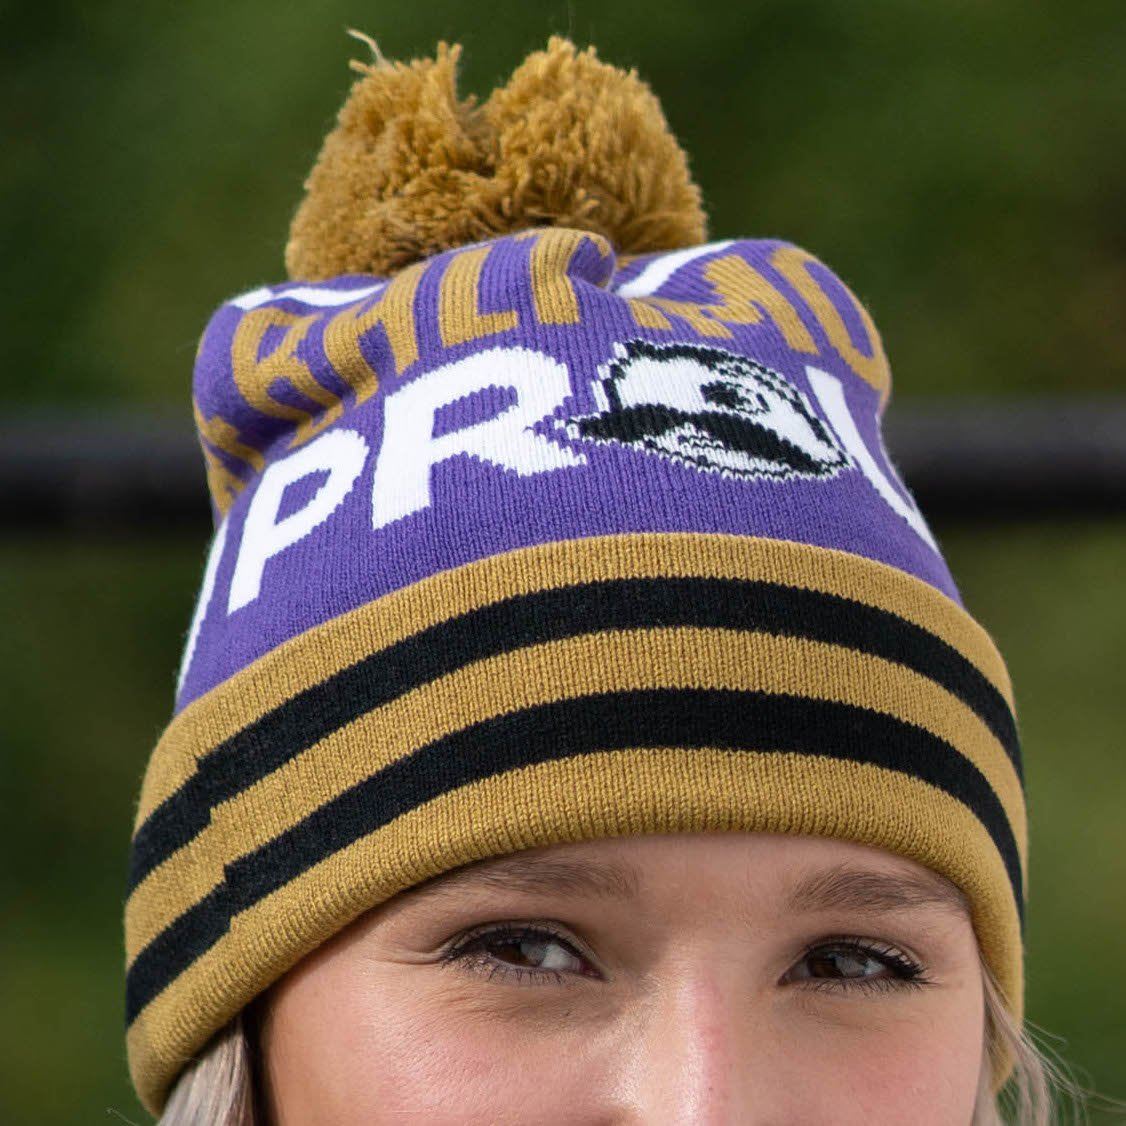 Baltimore Proud Boh Text (Purple w/ Gold Pom) / Knit Beanie Cap - Route One Apparel